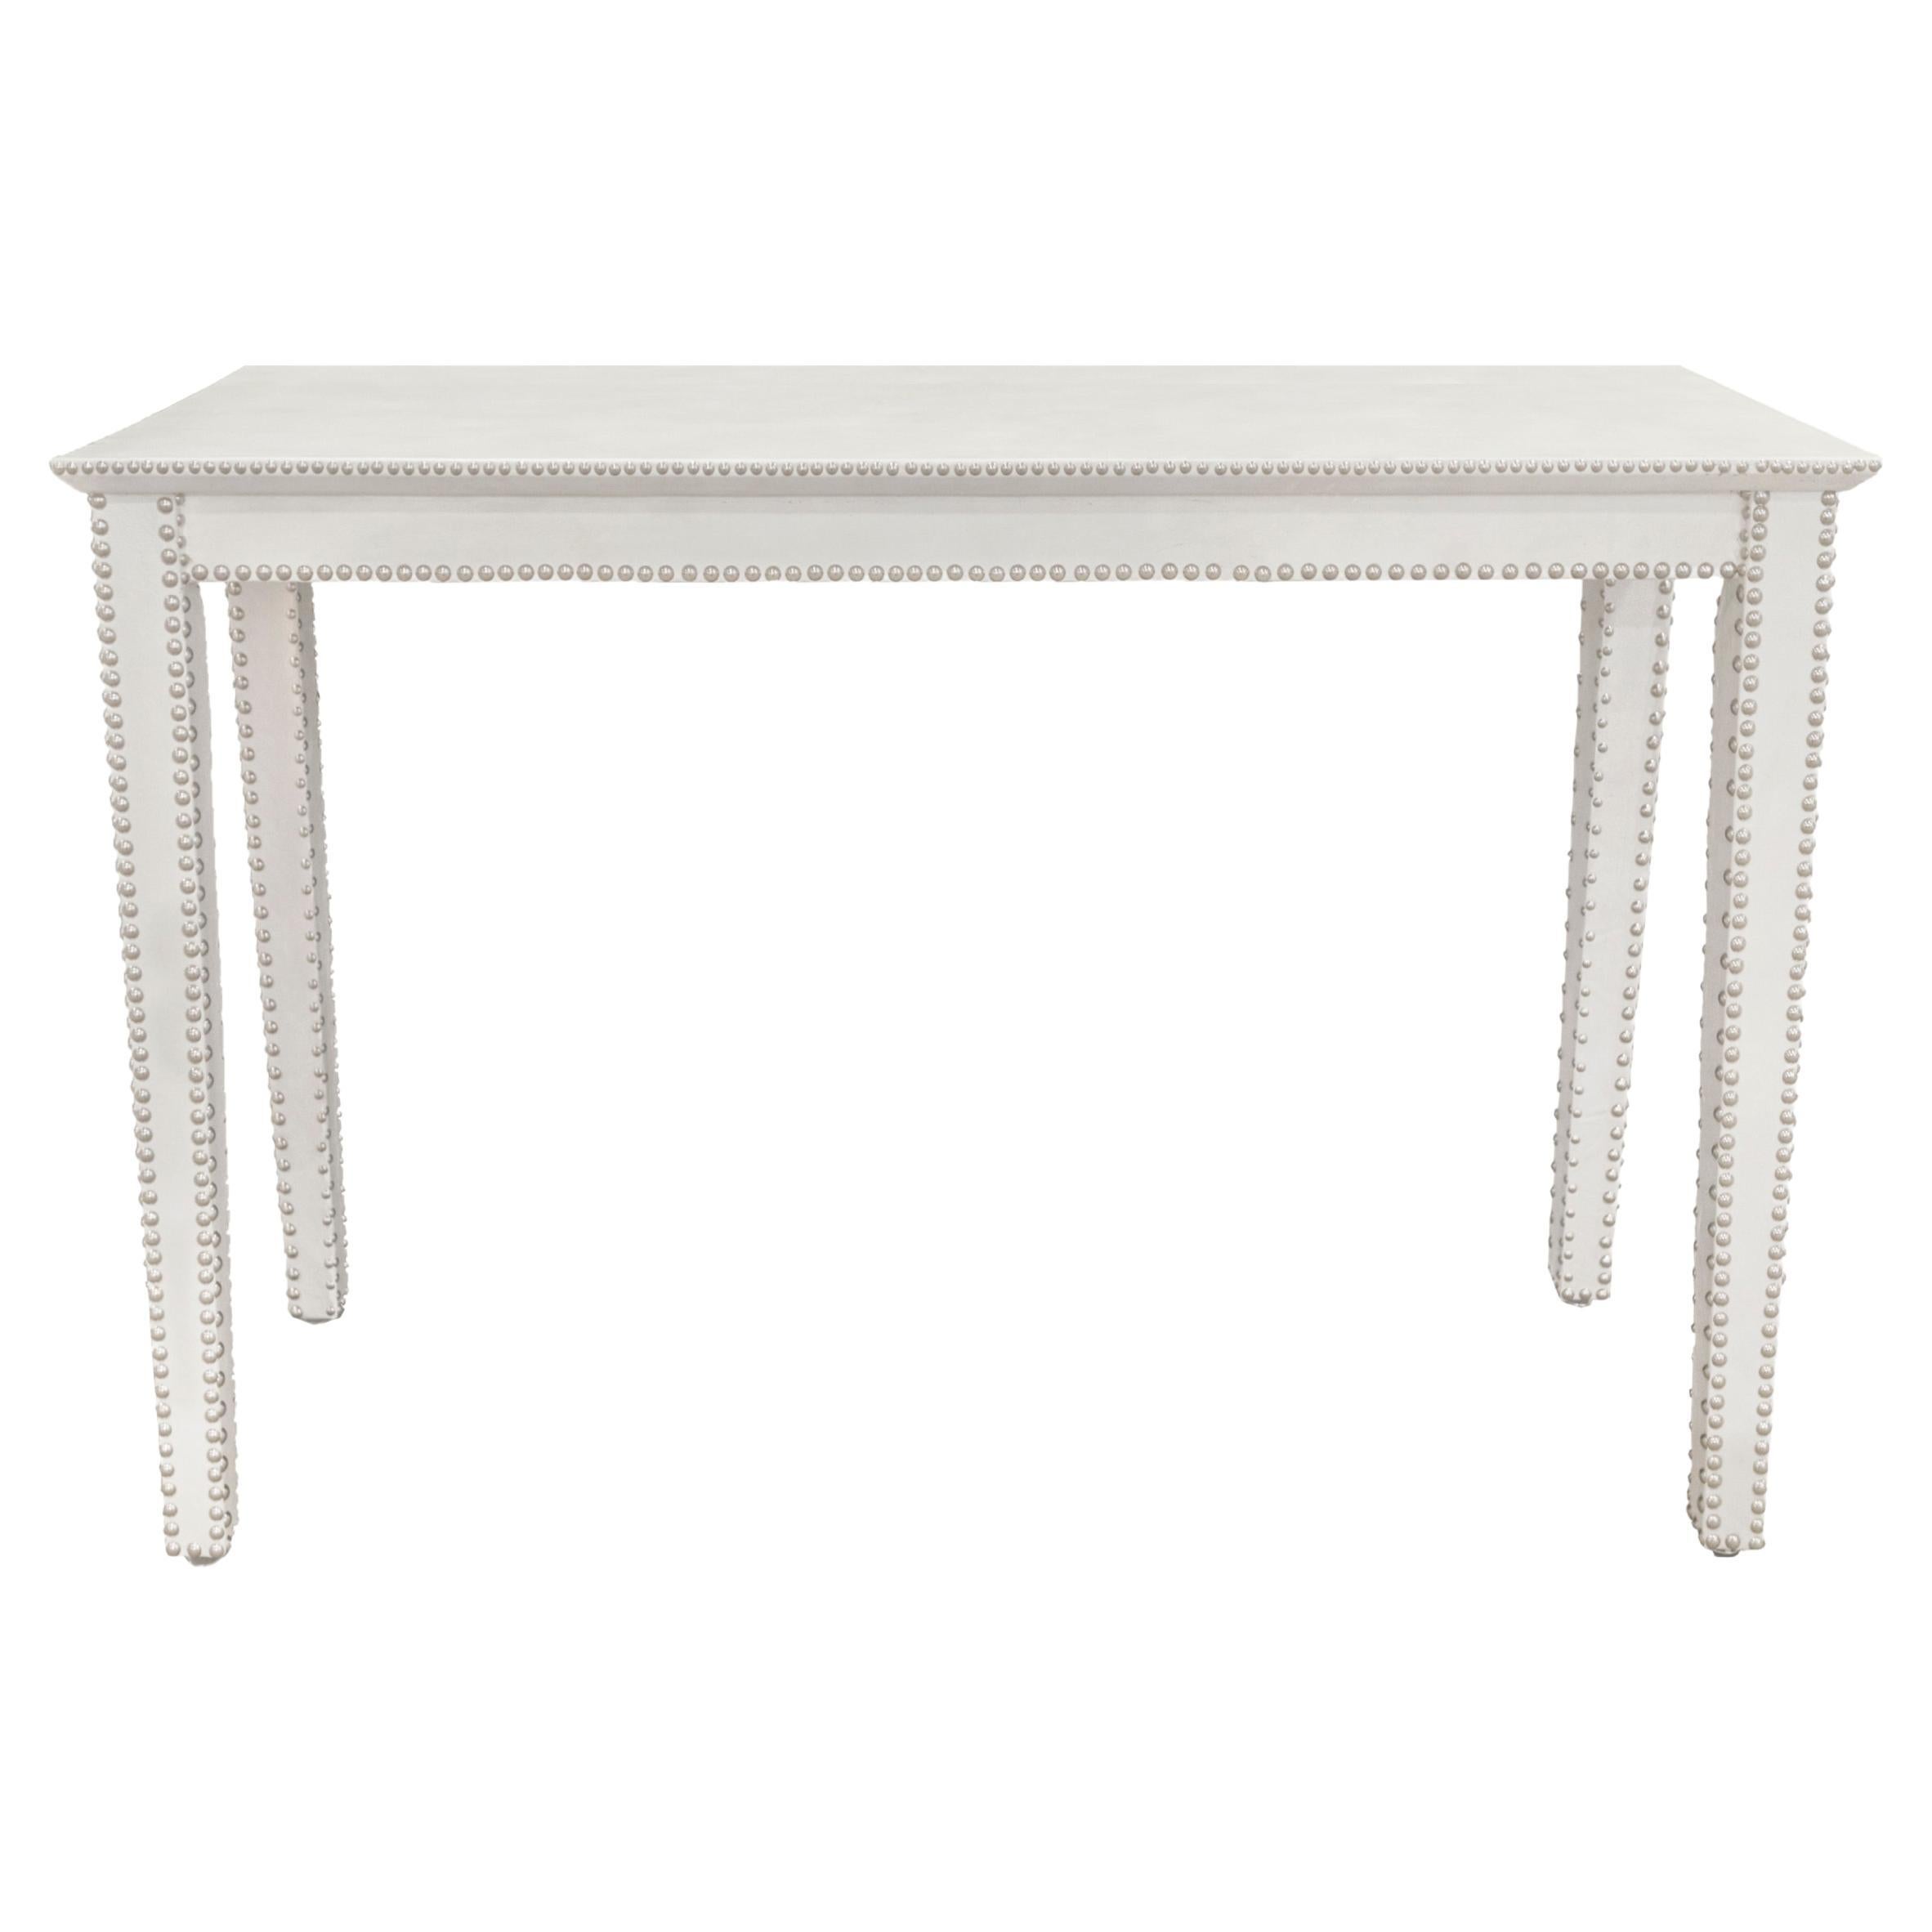 Lobel Originals Console Table in Leather and Chrome Studs circa 2010 'Signed' For Sale